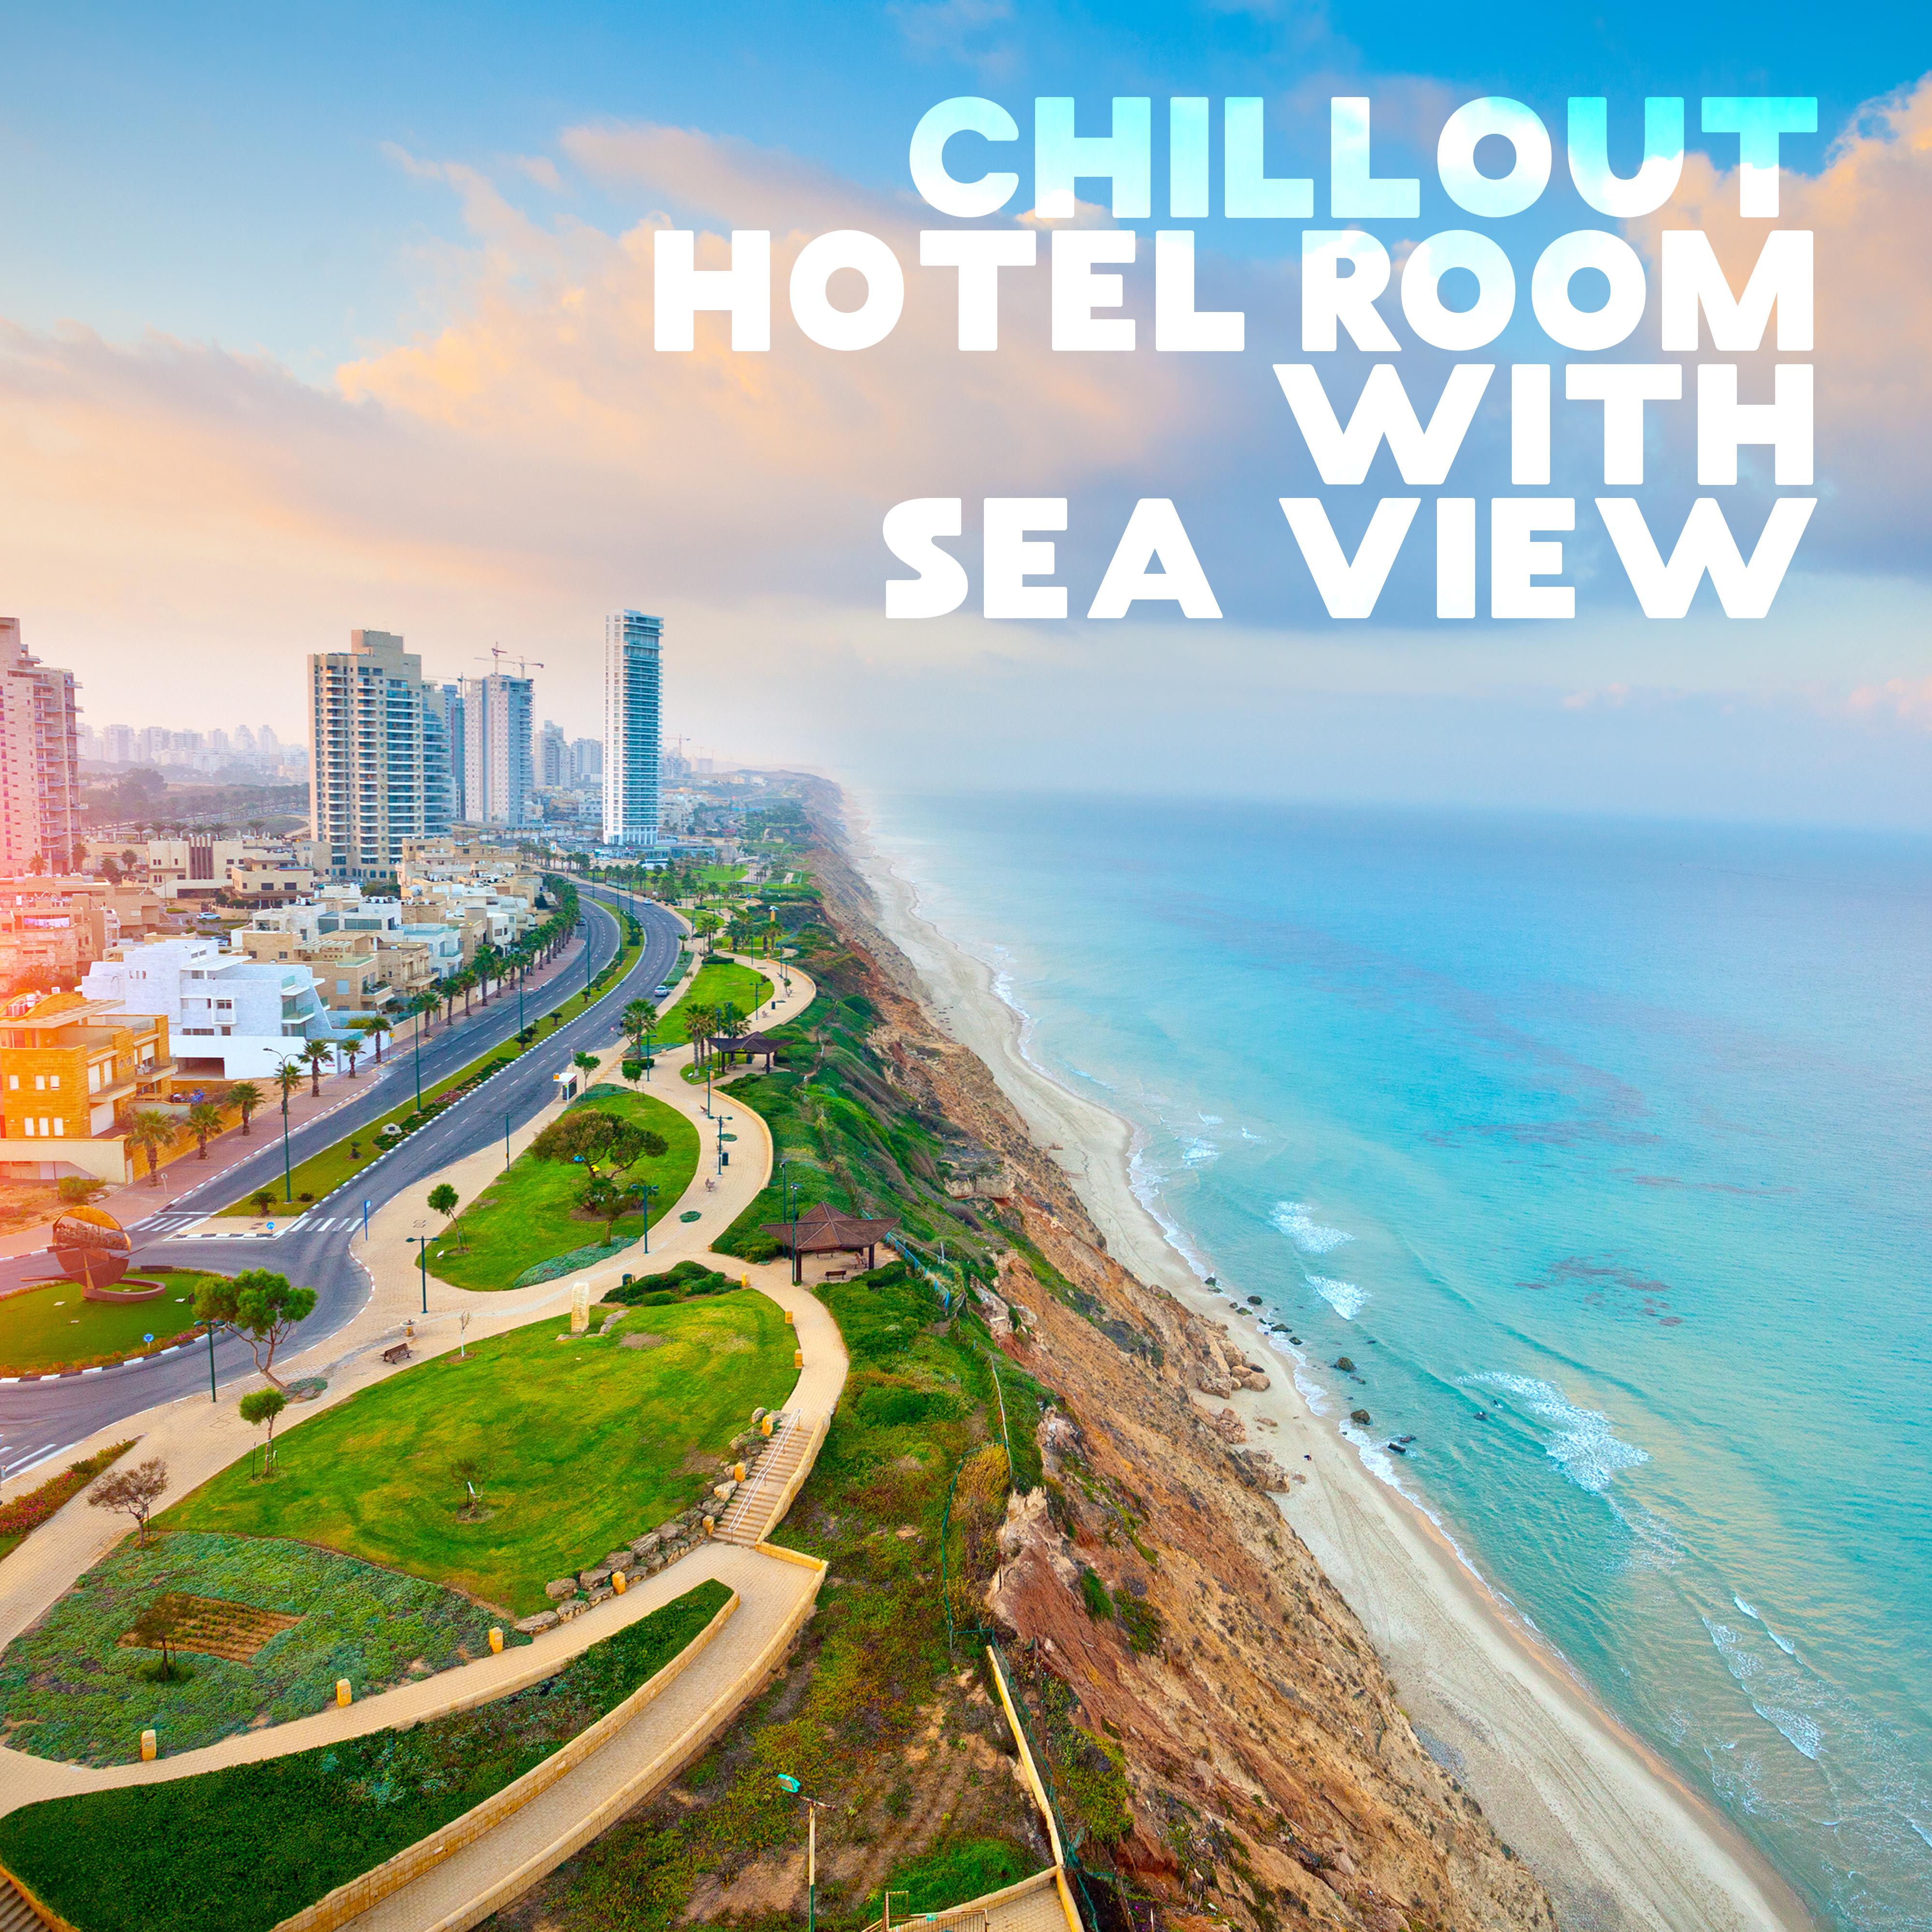 Chillout Hotel Room with Sea View: 2019 Electronic Chill Out Music Selection for Summer Vacation Celebration, Relaxation on the Hot Beach, Family Holiday Background Vibes